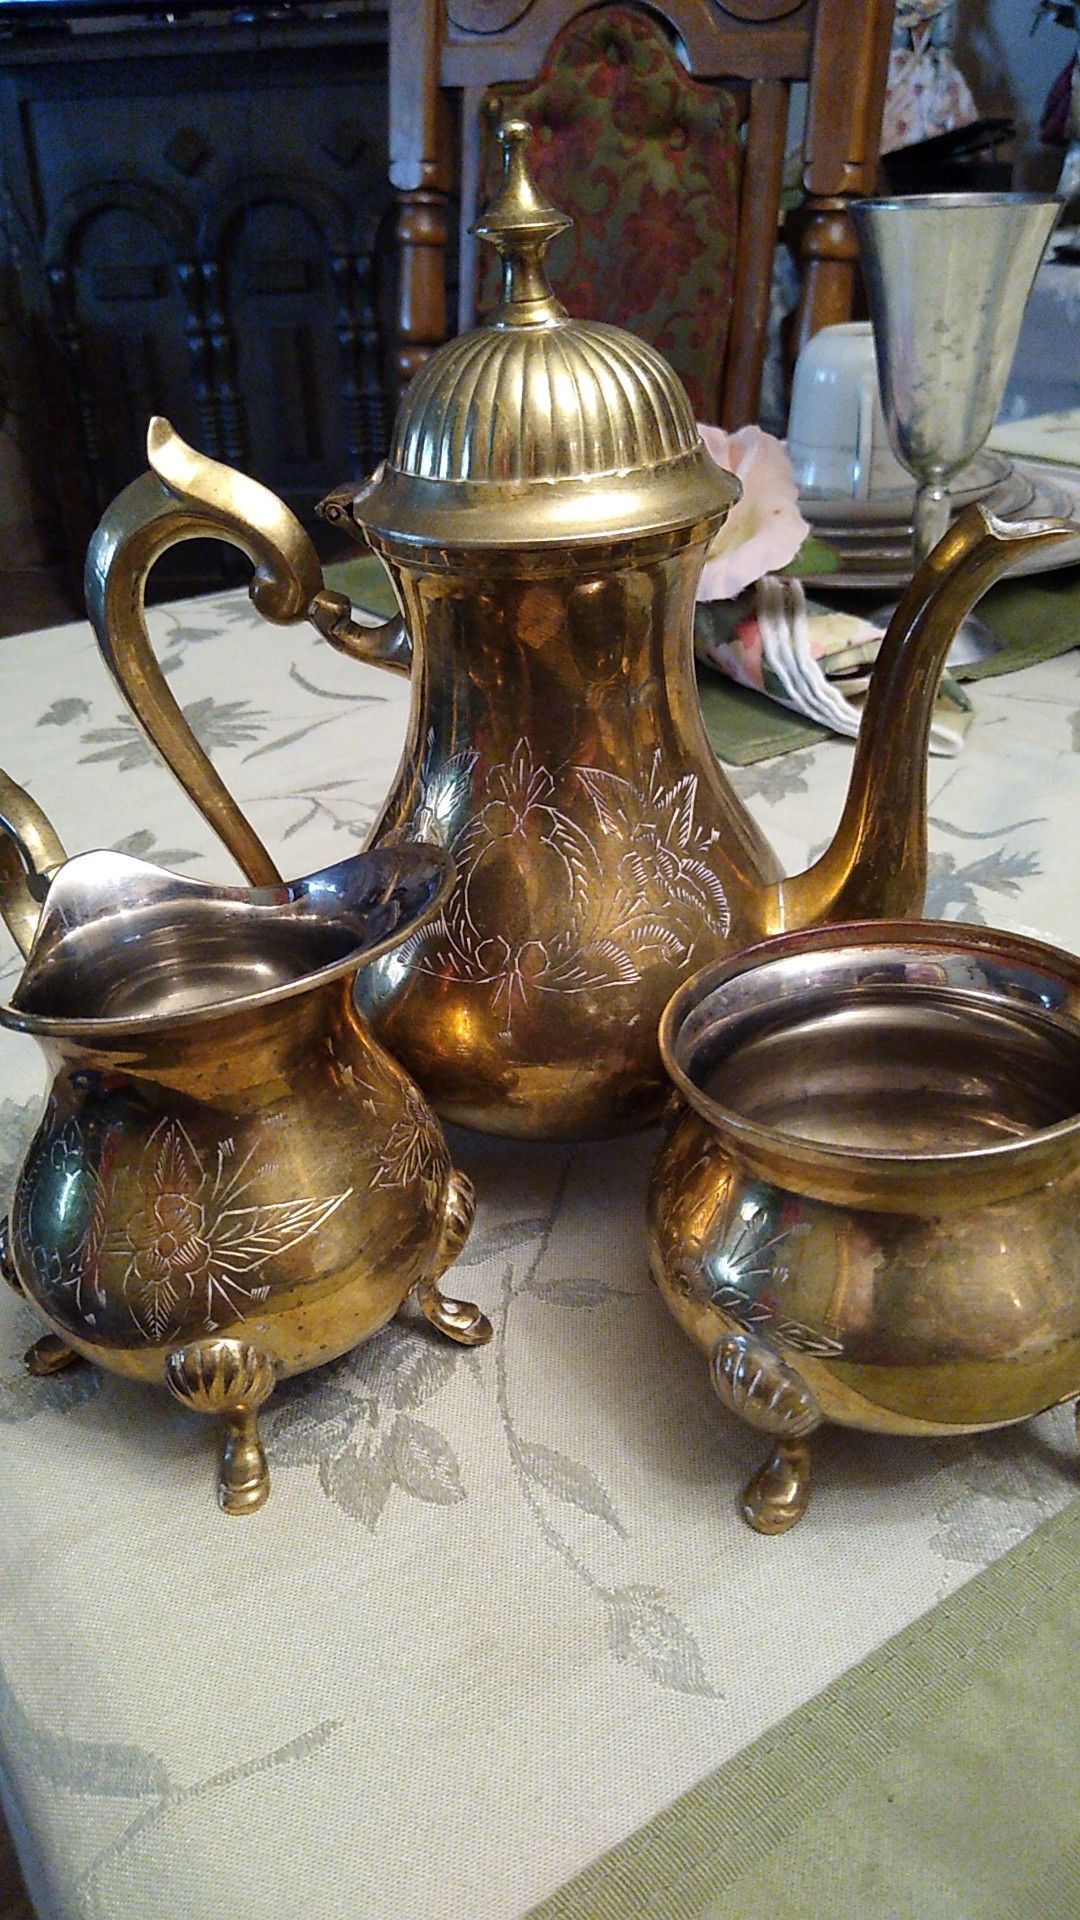 Brass tea set with creamer and sugar from India